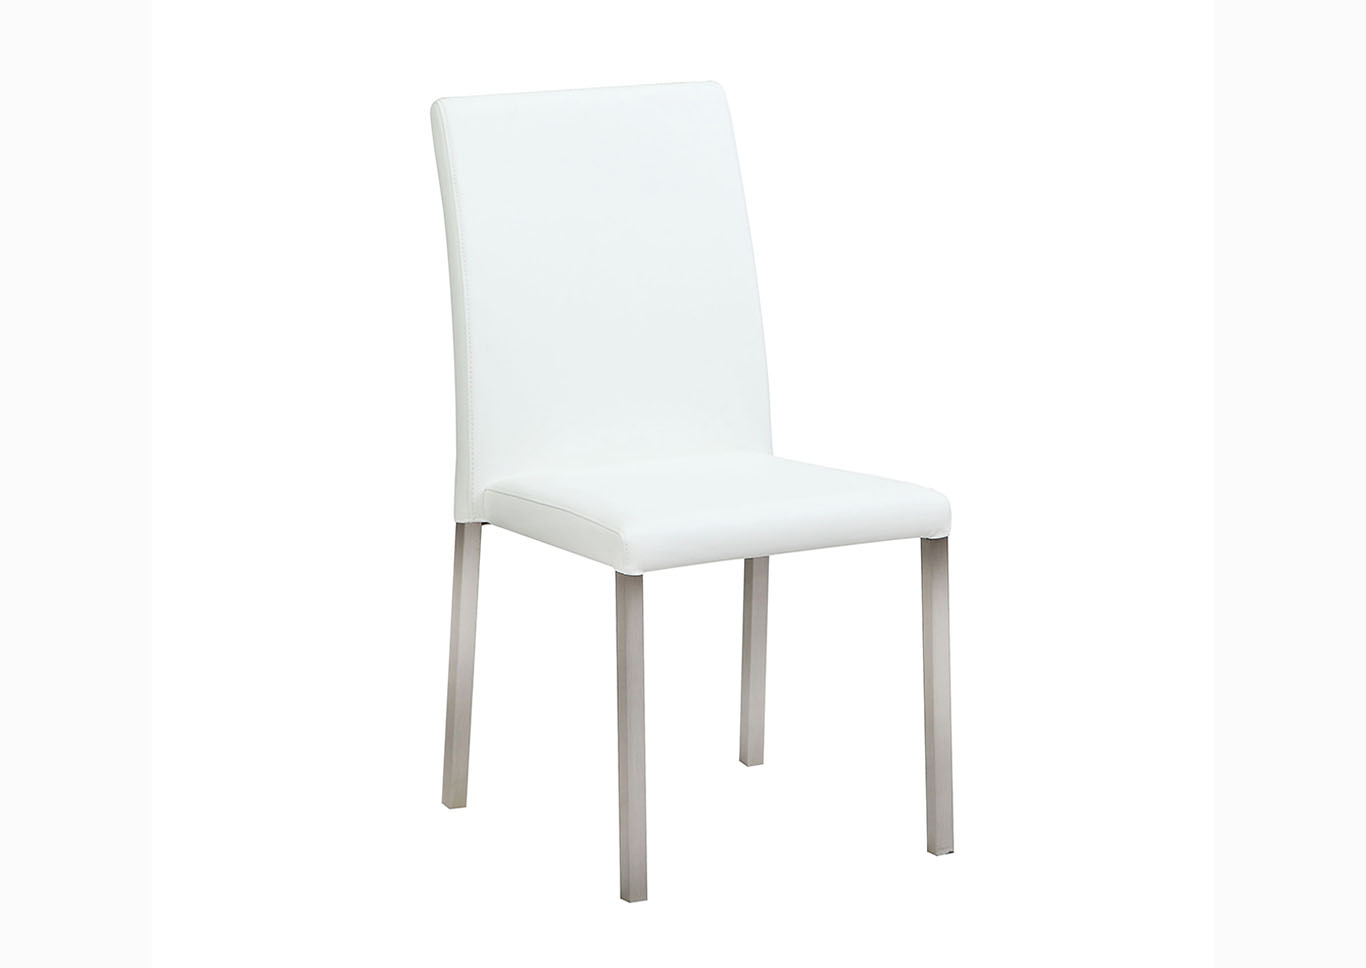 Claudia White Straight Back Side Chair,Chintaly Imports